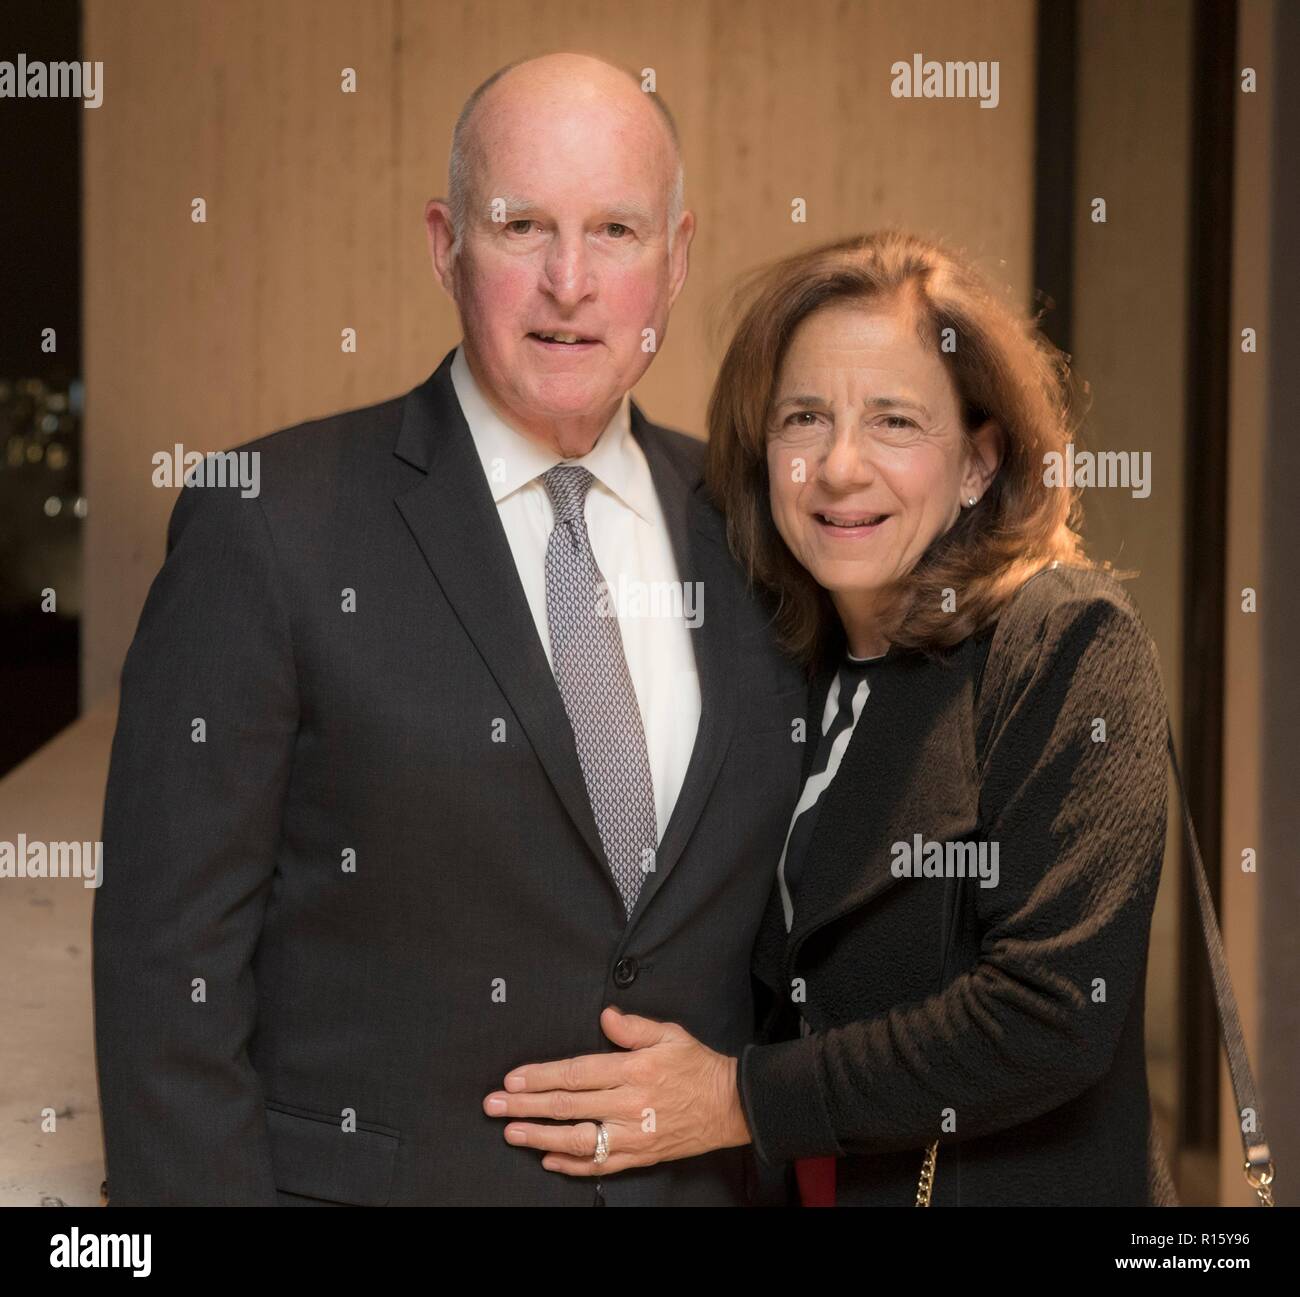 California Governor Jerry Brown and his wife Anne Gust Brown at the LBJ Presidential Library November 7, 2018 in Austin, Texas. Brown is completing his fourth term as Governor of California. Stock Photo